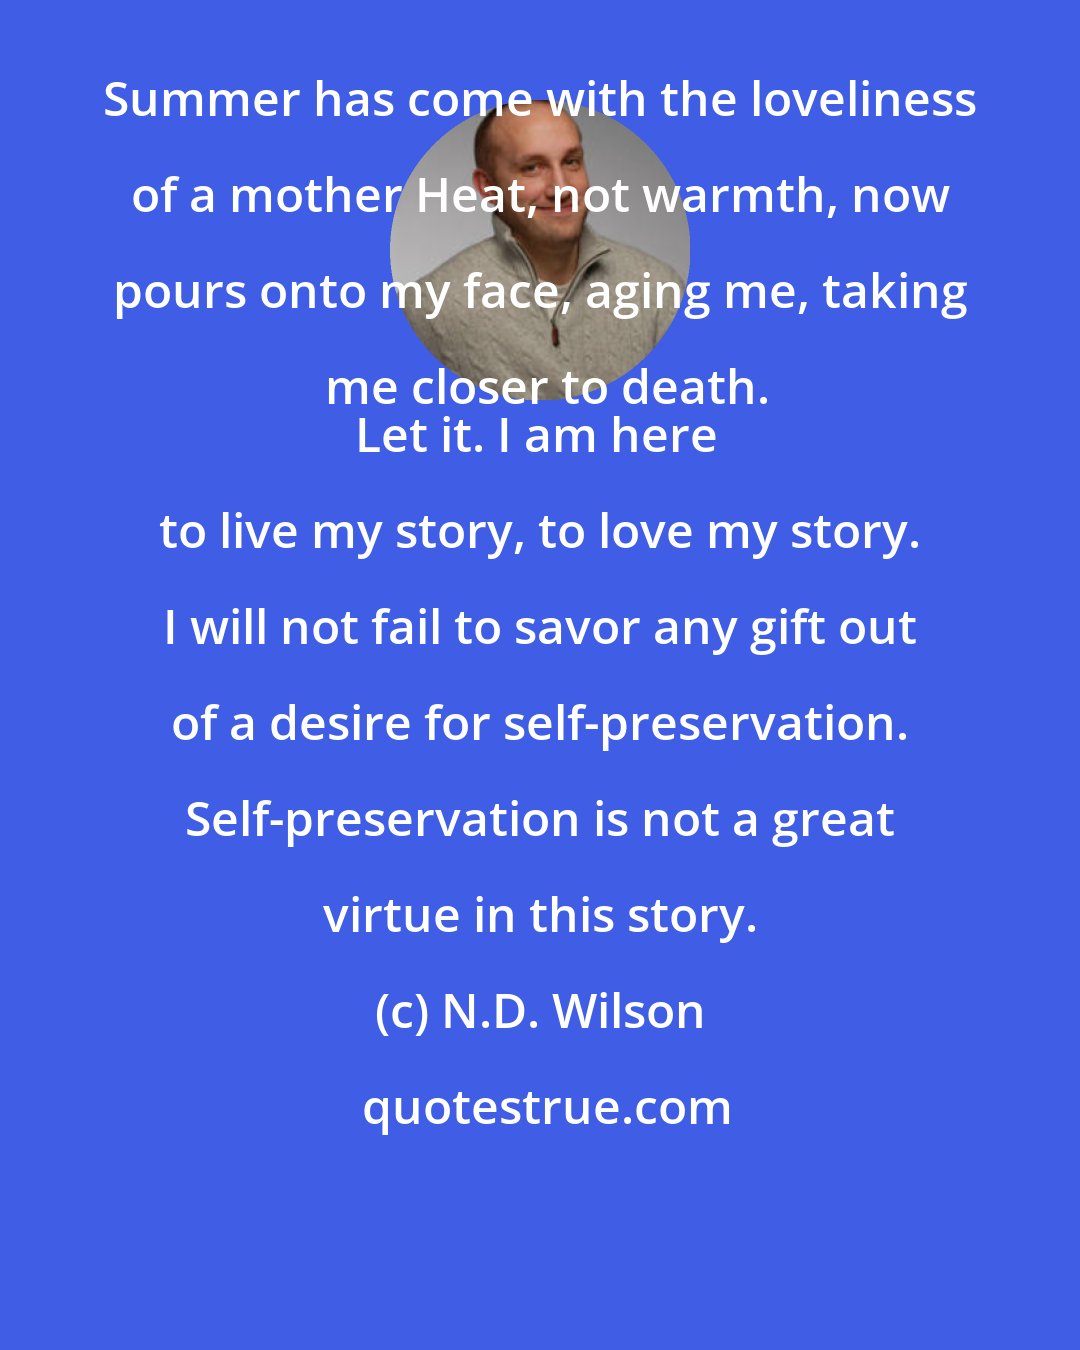 N.D. Wilson: Summer has come with the loveliness of a mother Heat, not warmth, now pours onto my face, aging me, taking me closer to death.
Let it. I am here to live my story, to love my story. I will not fail to savor any gift out of a desire for self-preservation. Self-preservation is not a great virtue in this story.